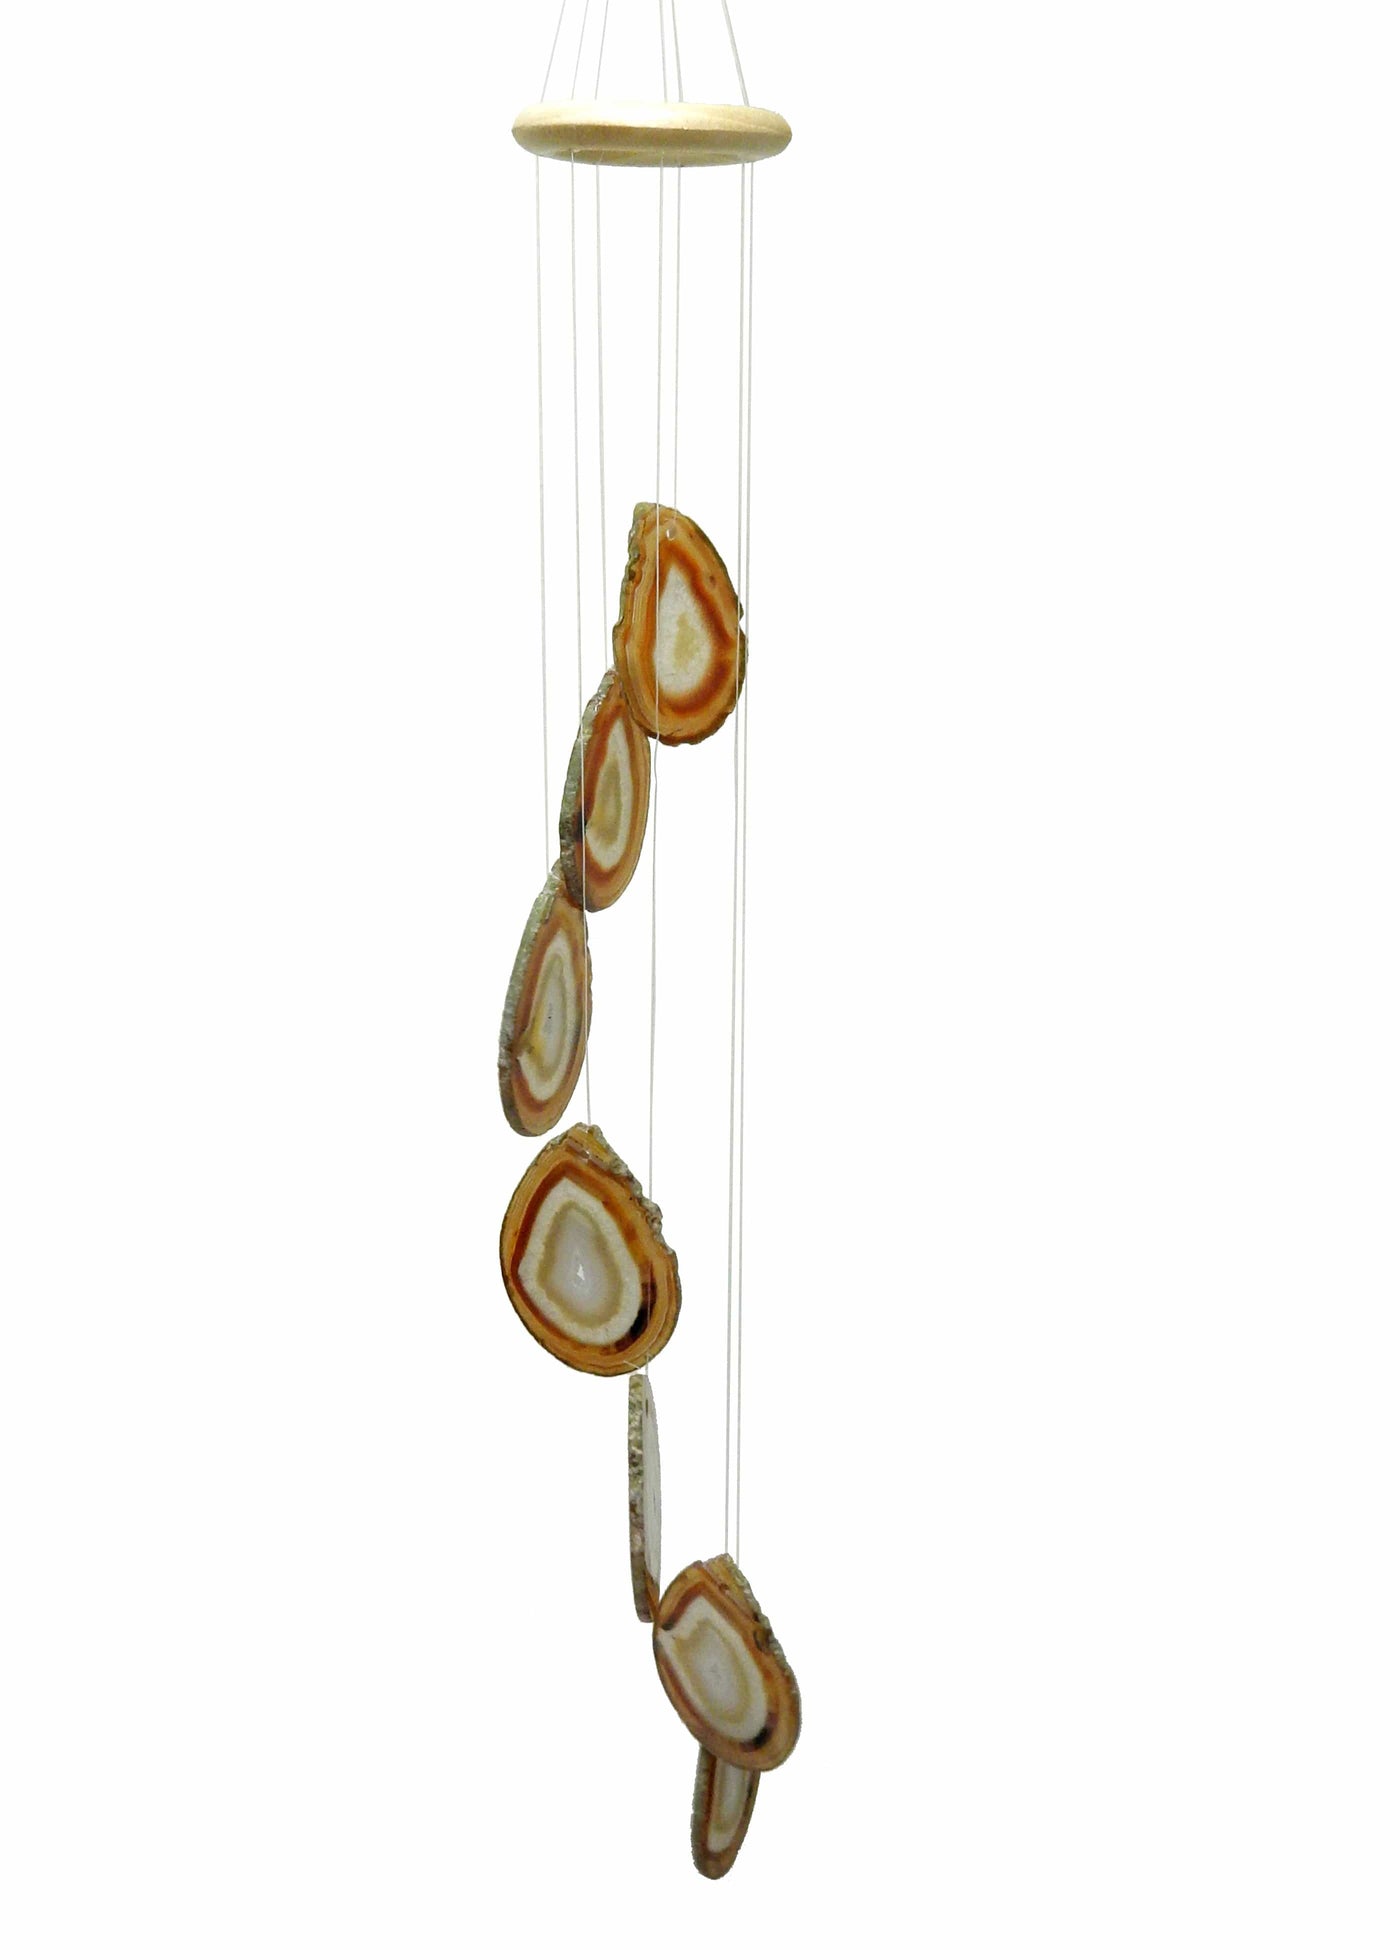 Picture of our red/orange agate windchime hanging, displayed on a white background.